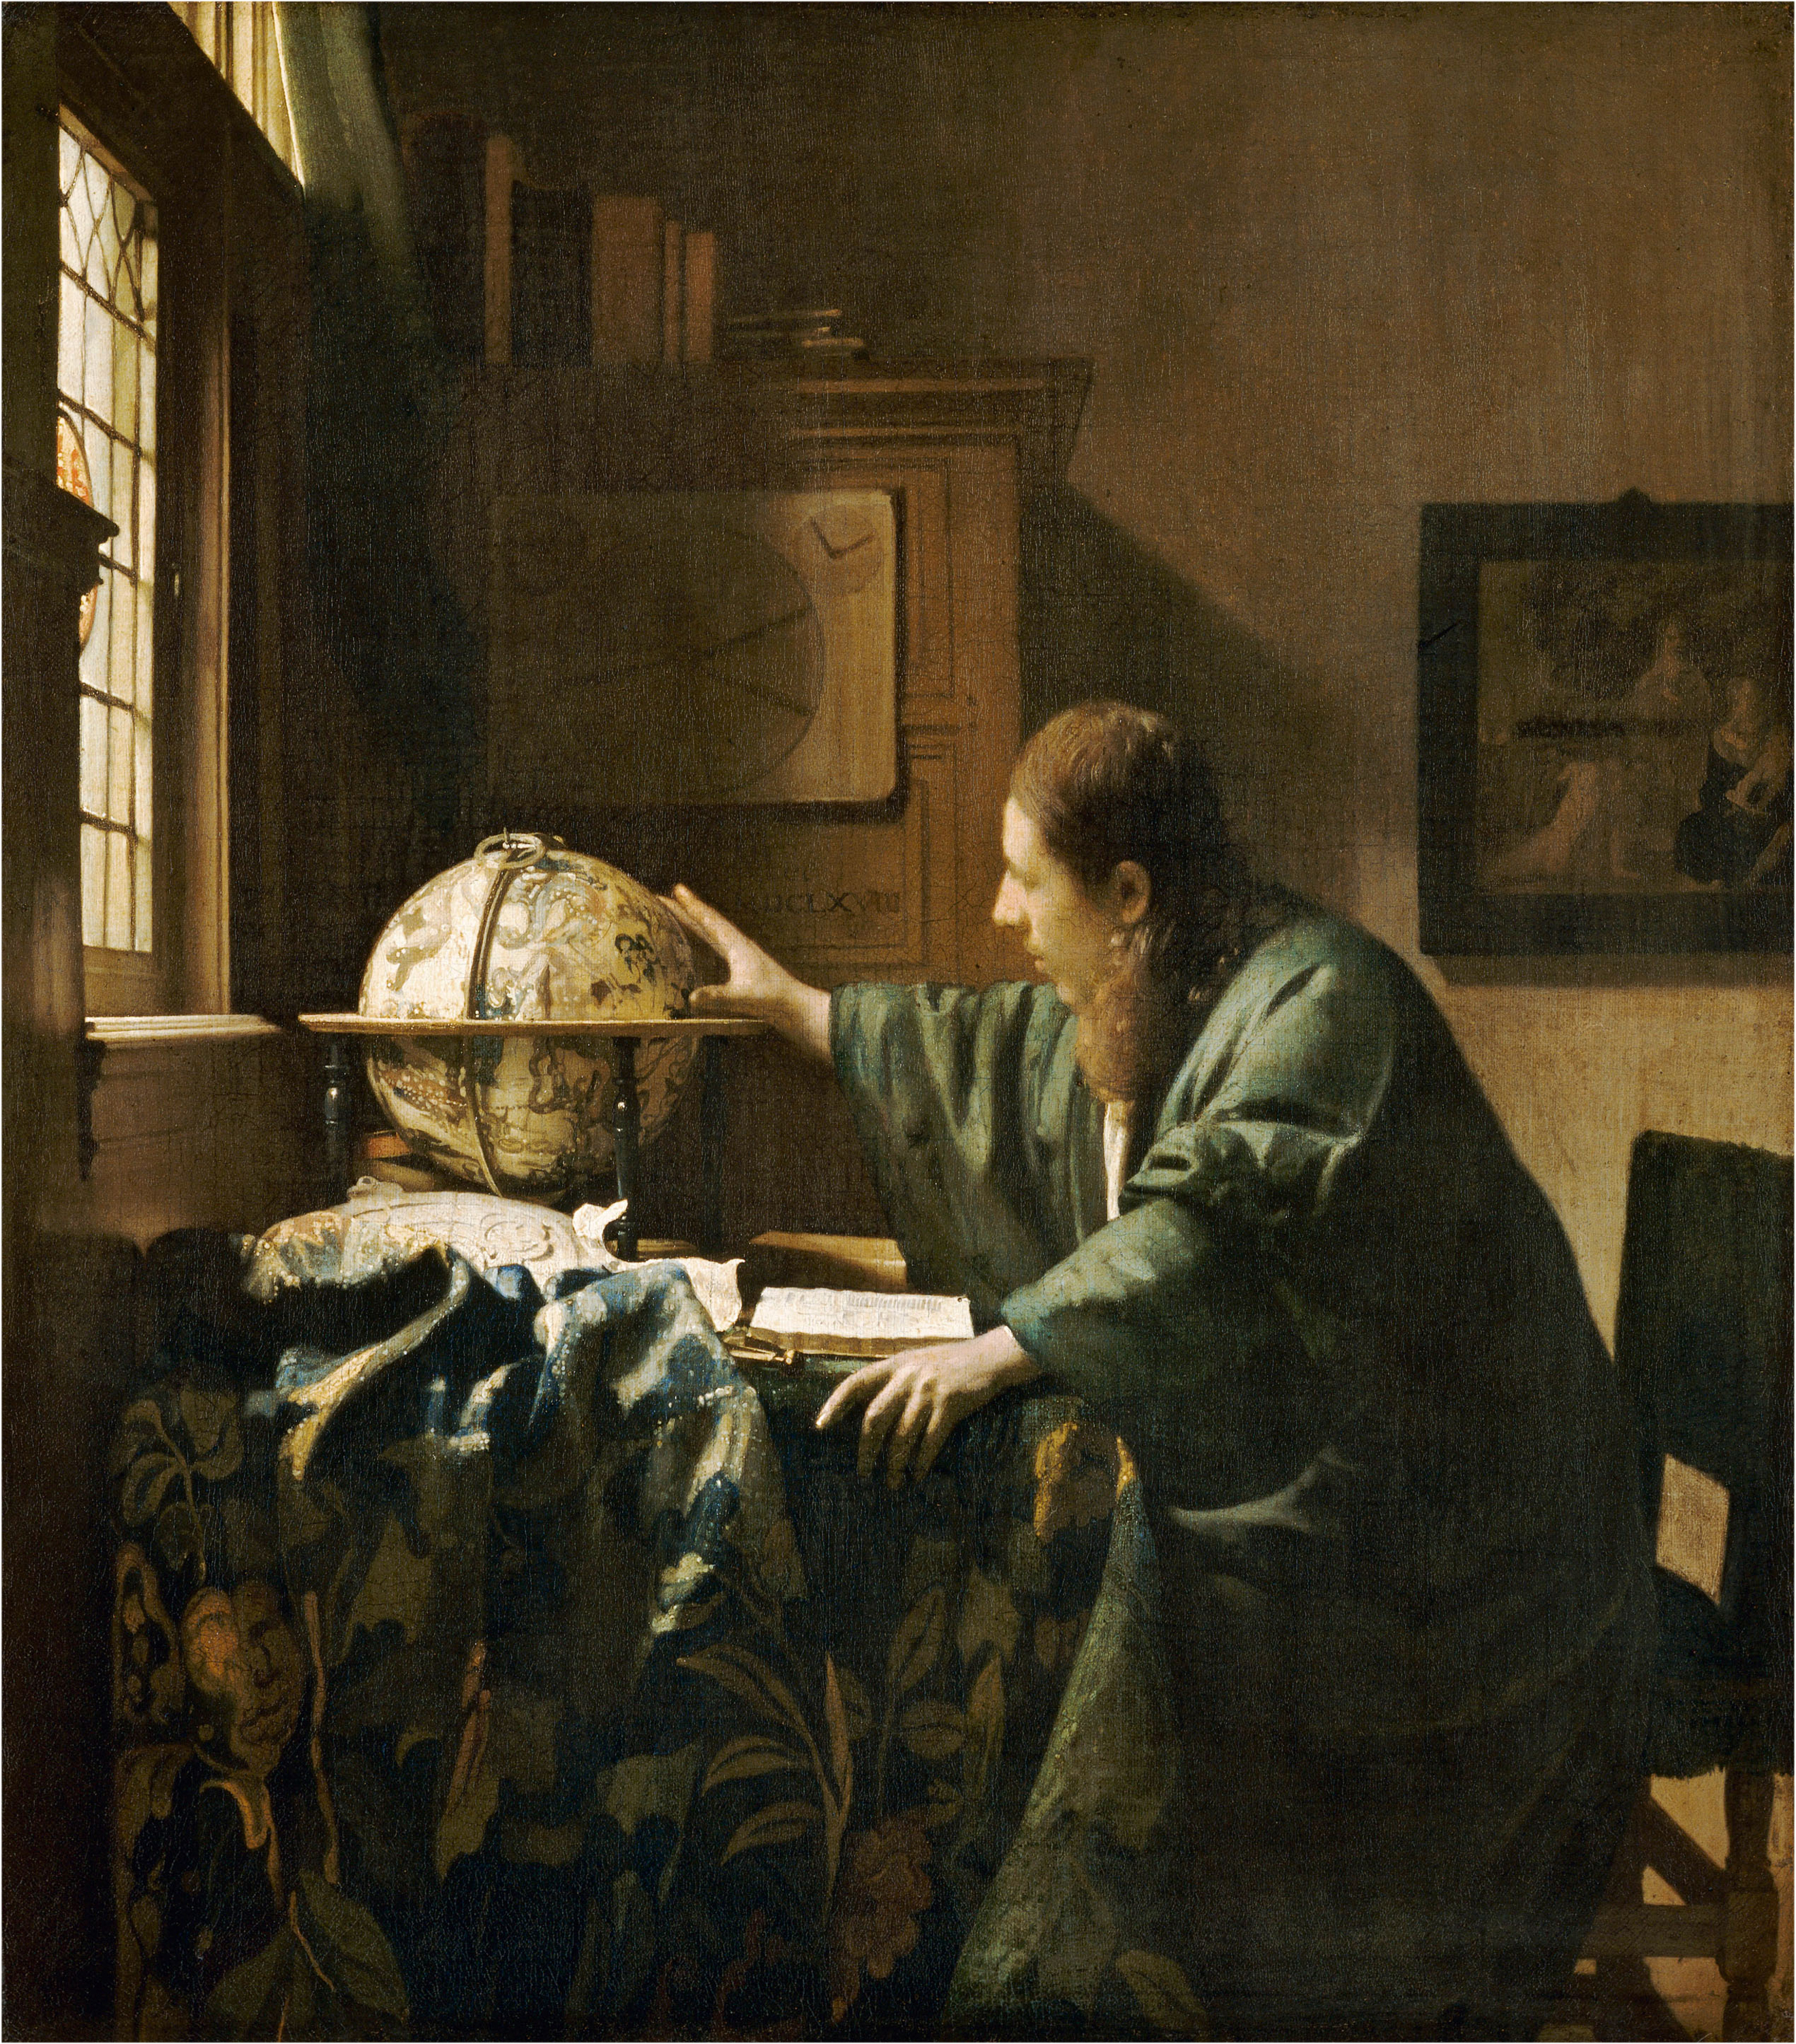 National Gallery of Art to host Vermeer exhibition later this year